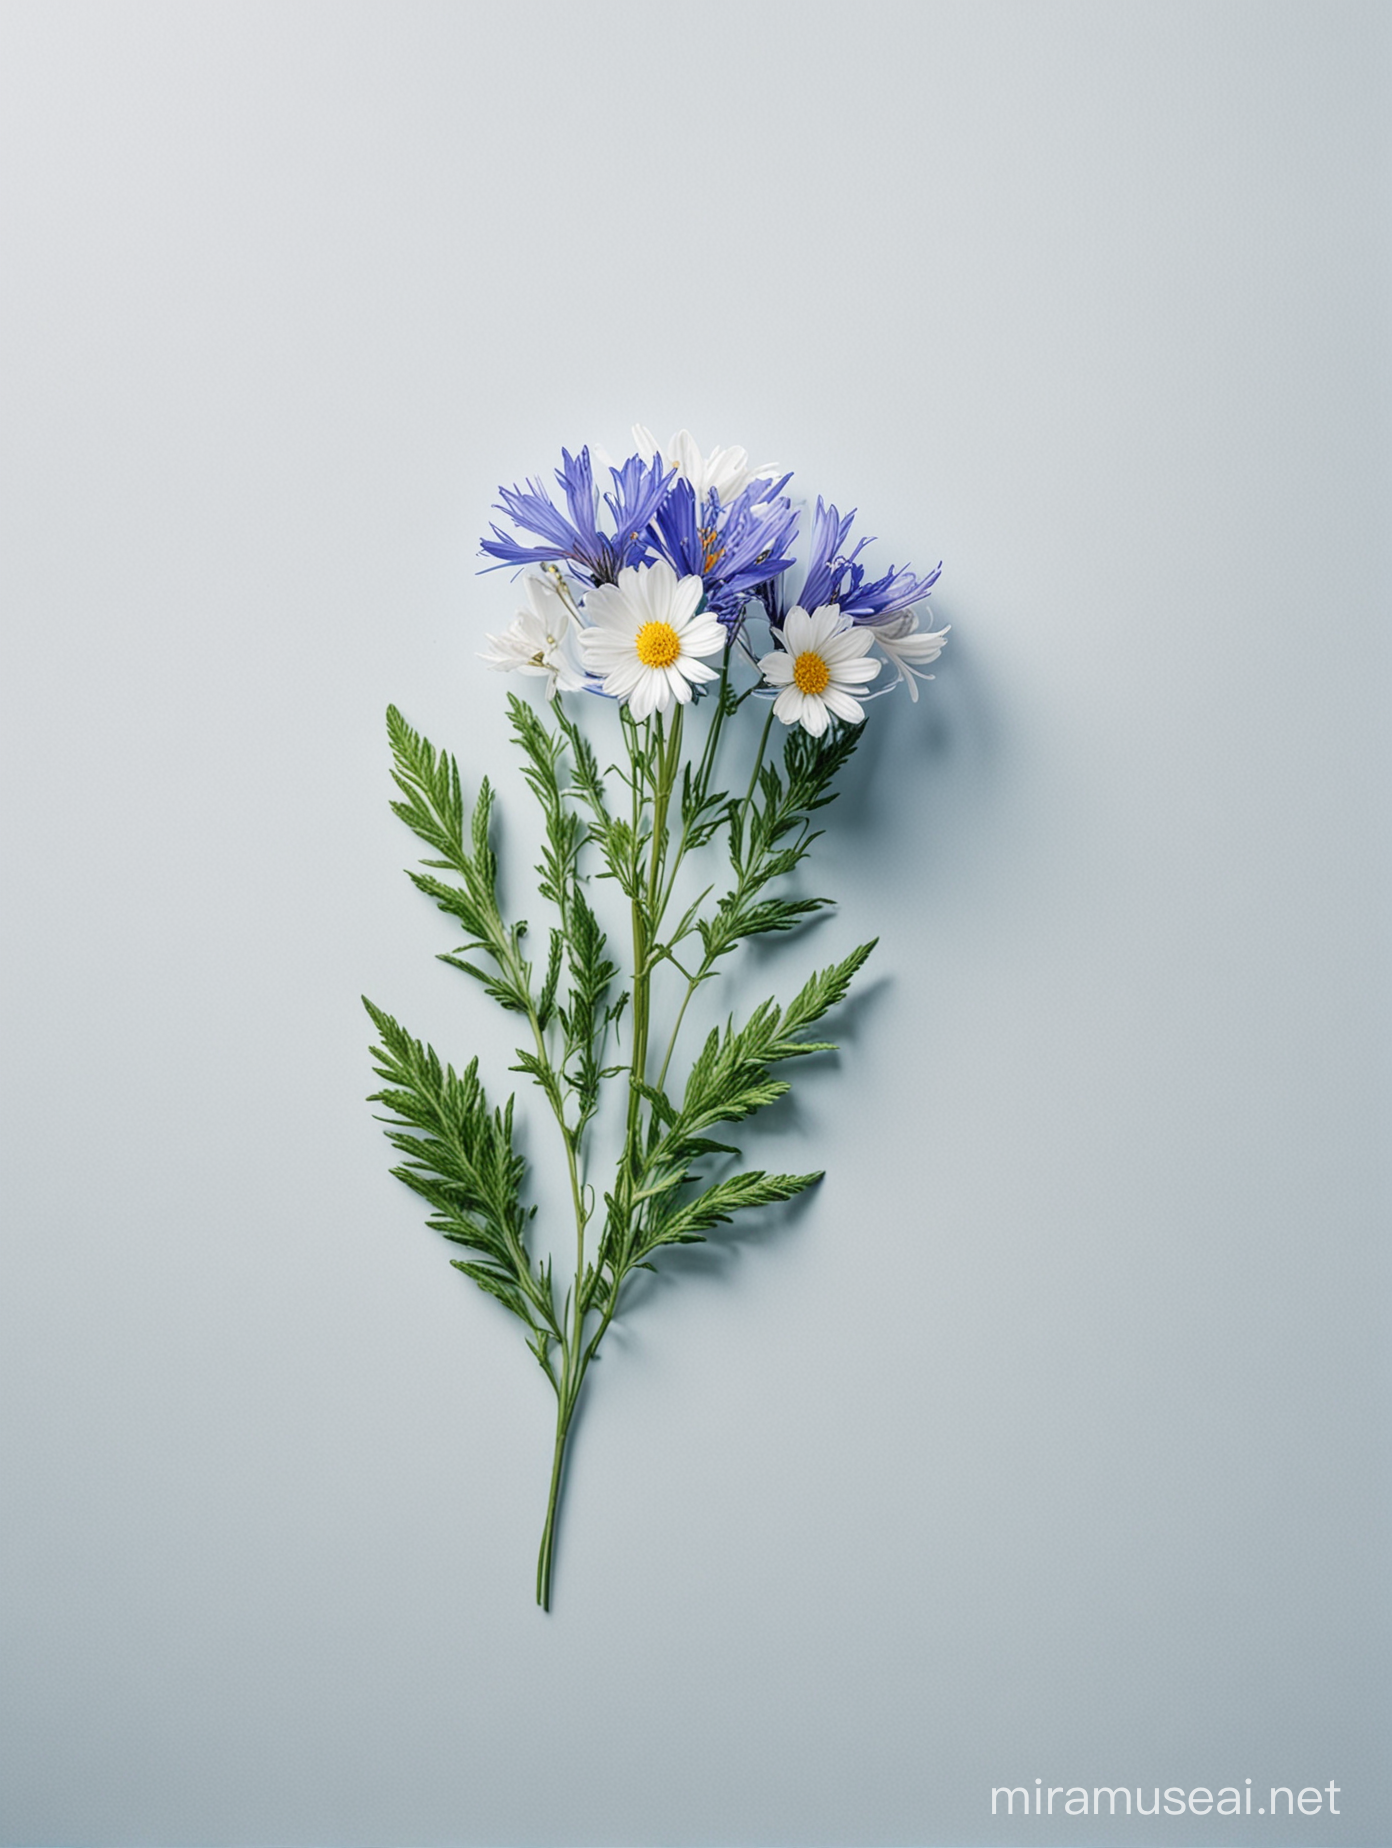 Vibrant Blue and White Wild Flowers on Natural Background